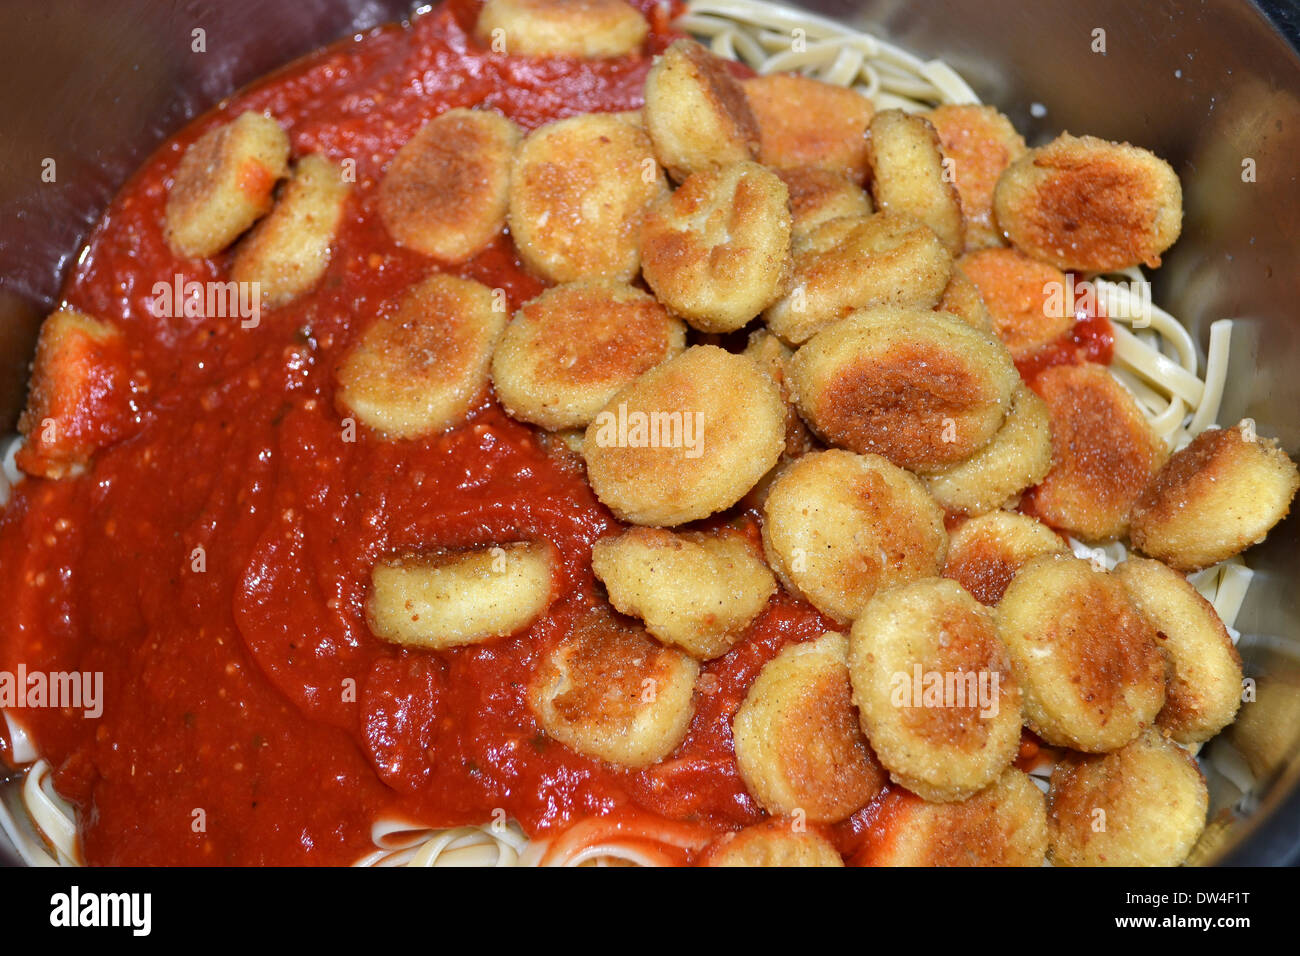 Spaghetti with chicken nuggets and pasta sauce Stock Photo - Alamy